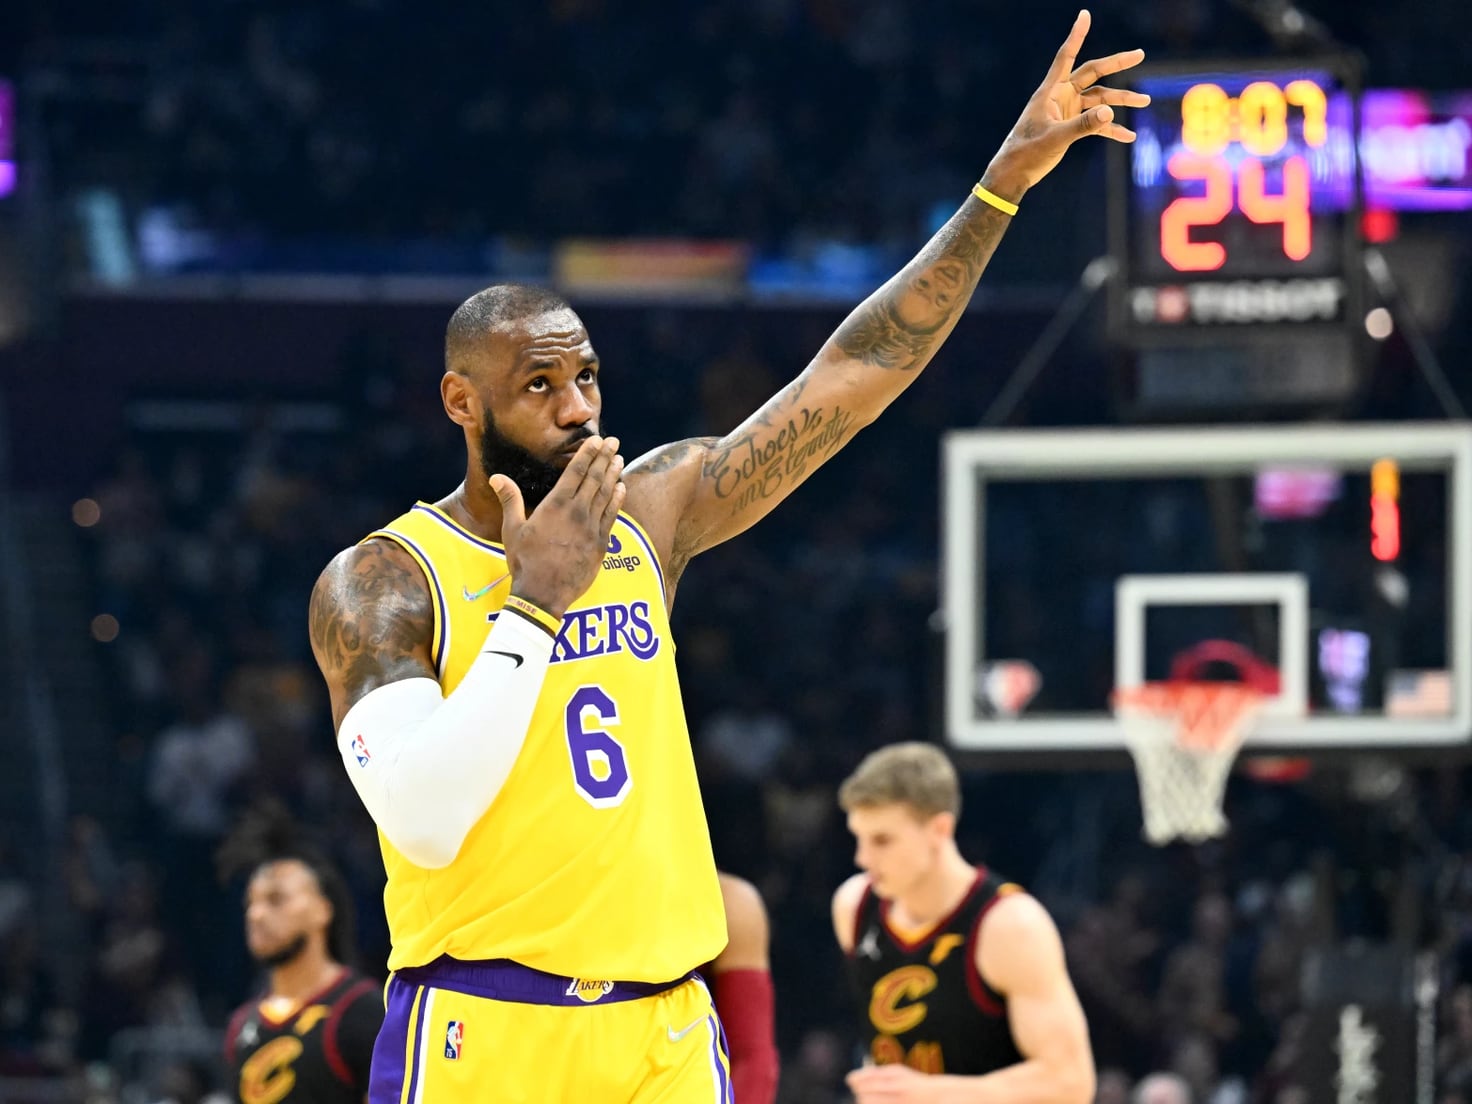 LeBron James to wear No. 23 after NBA retires No. 6 for Russell